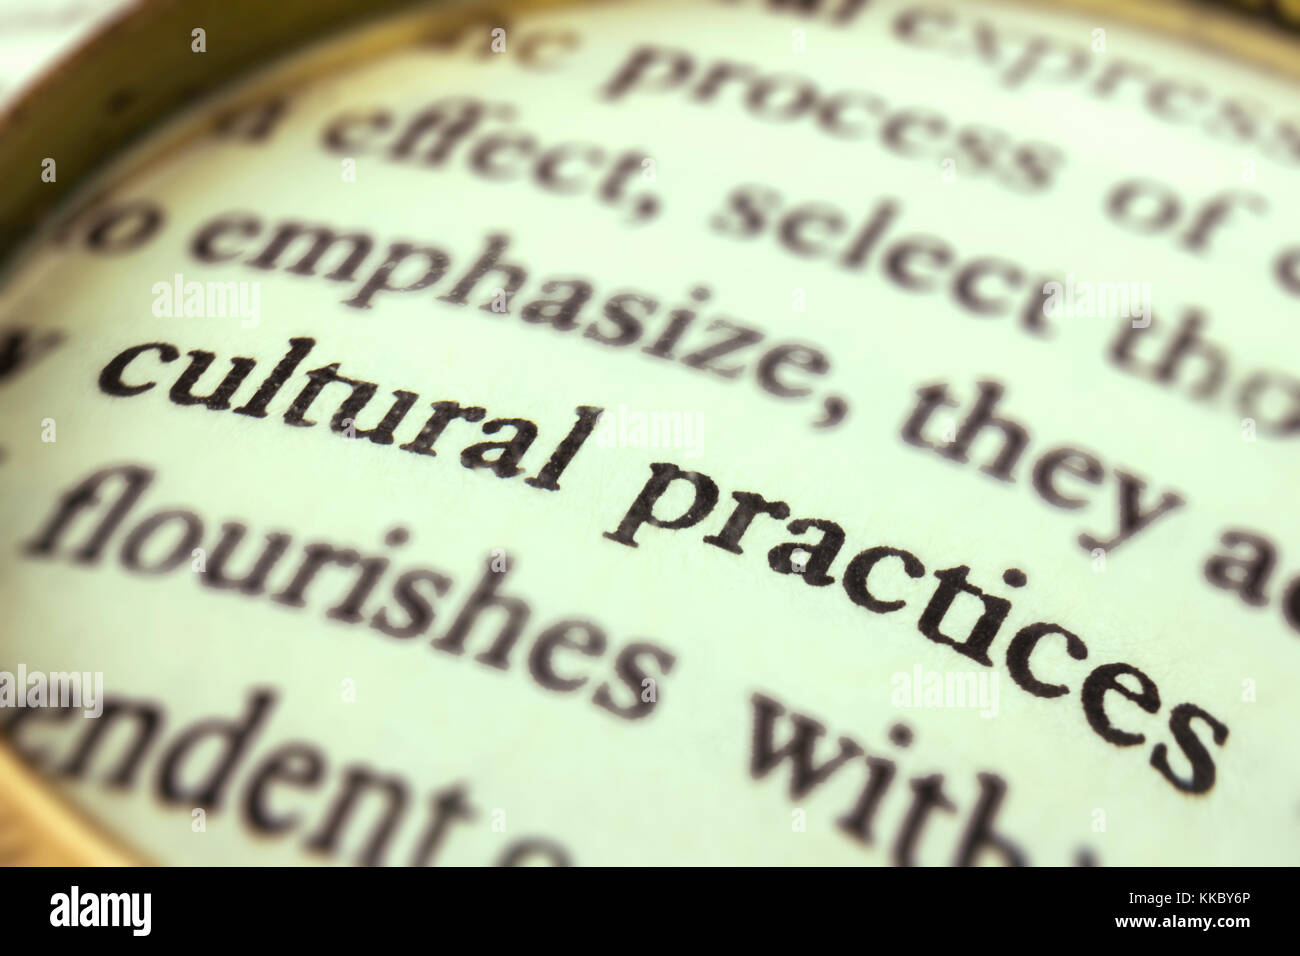 The group of words 'Cultural practices' emphasized by a magnifying glass and wrapped around with a blurry text. Stock Photo